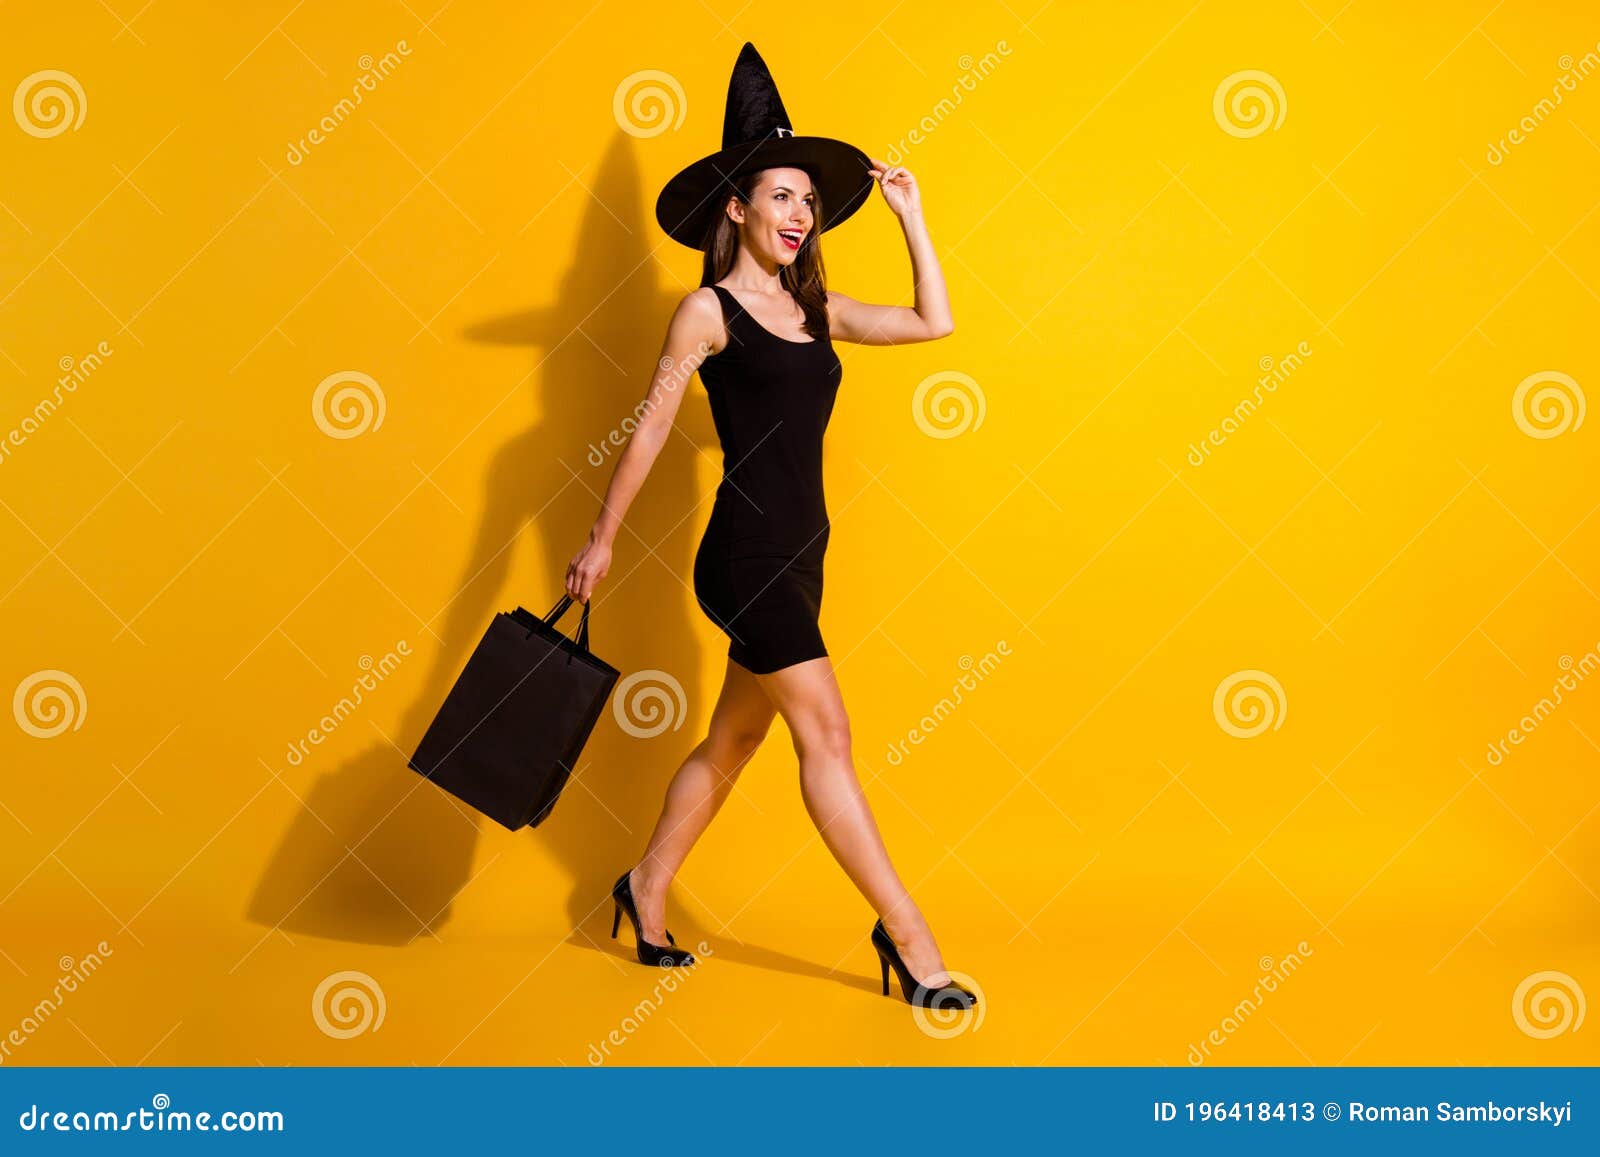 Full Length Body Size Profile Side View Of Her She Attractive Pretty Classy Cheerful Thin Lady